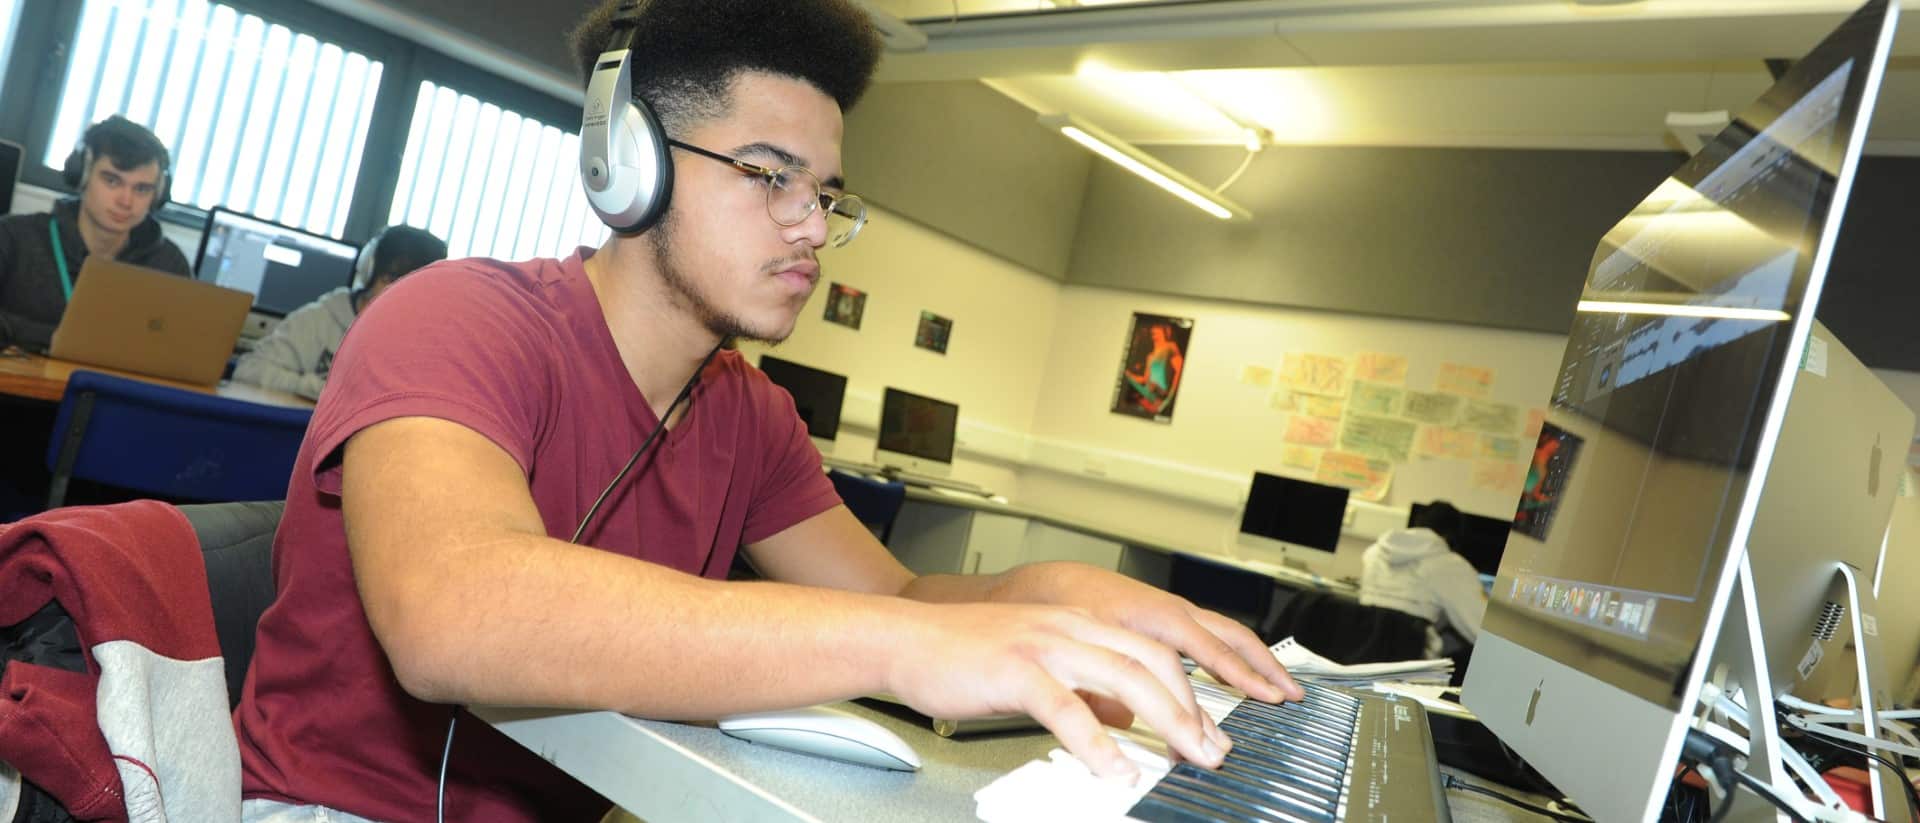 Music production student working at a computer.